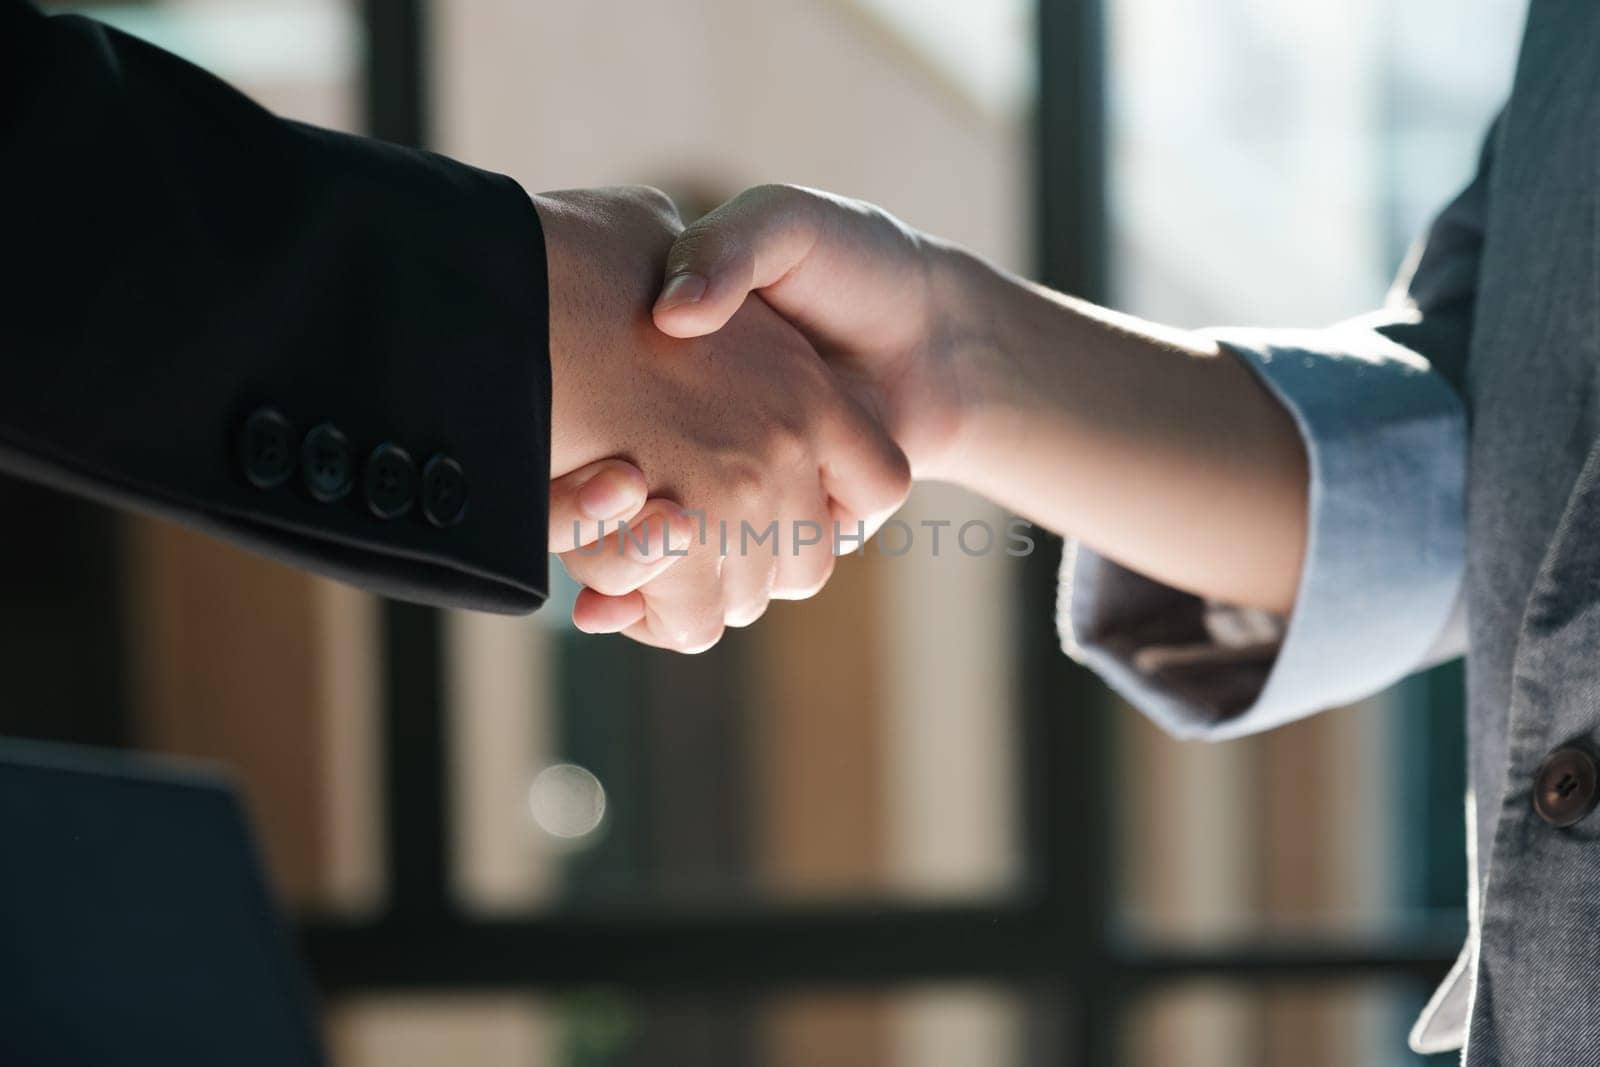 Two people shaking hands in a business setting. The man is wearing a suit and tie, while the woman is wearing a blazer. The handshake is a sign of agreement or partnership between the two individuals